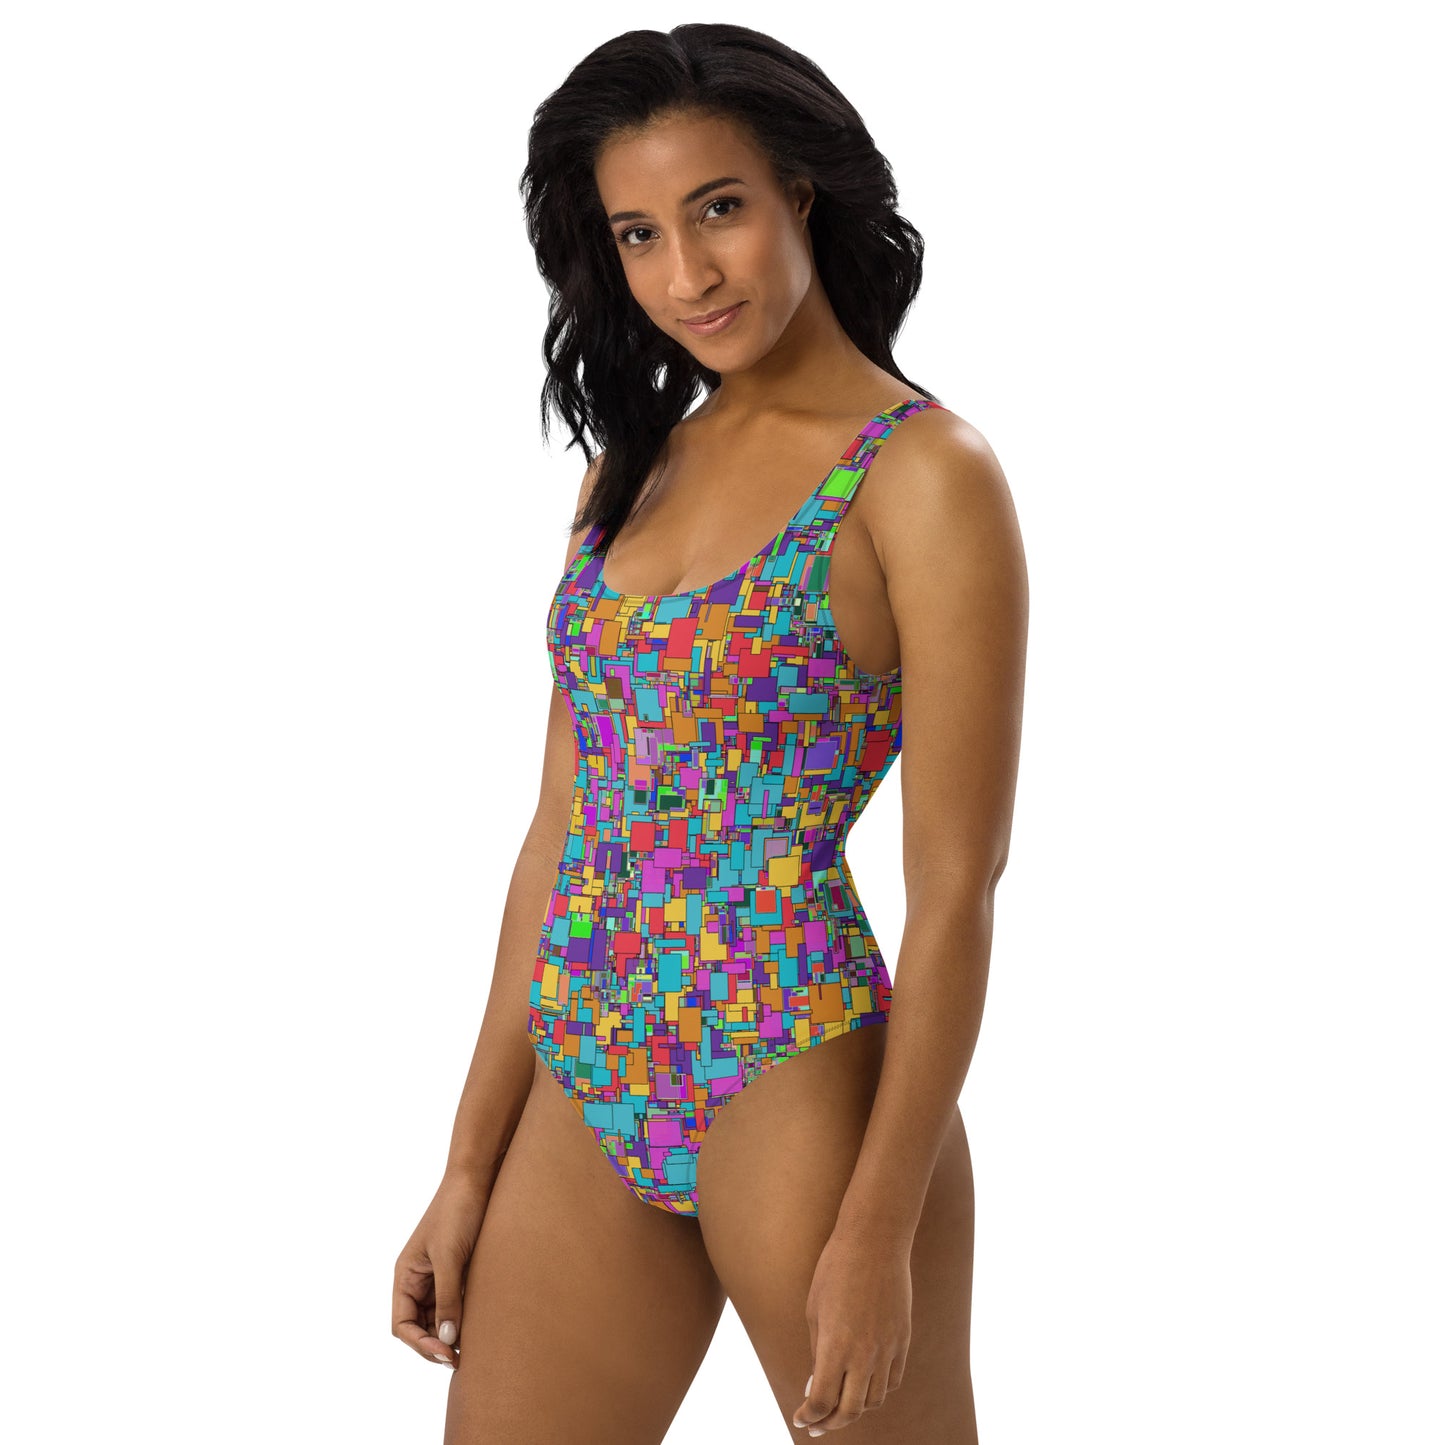 Unleash Your Inner Mermaid with Our Enchanting Patterned Swimsuit - Dive into Style!